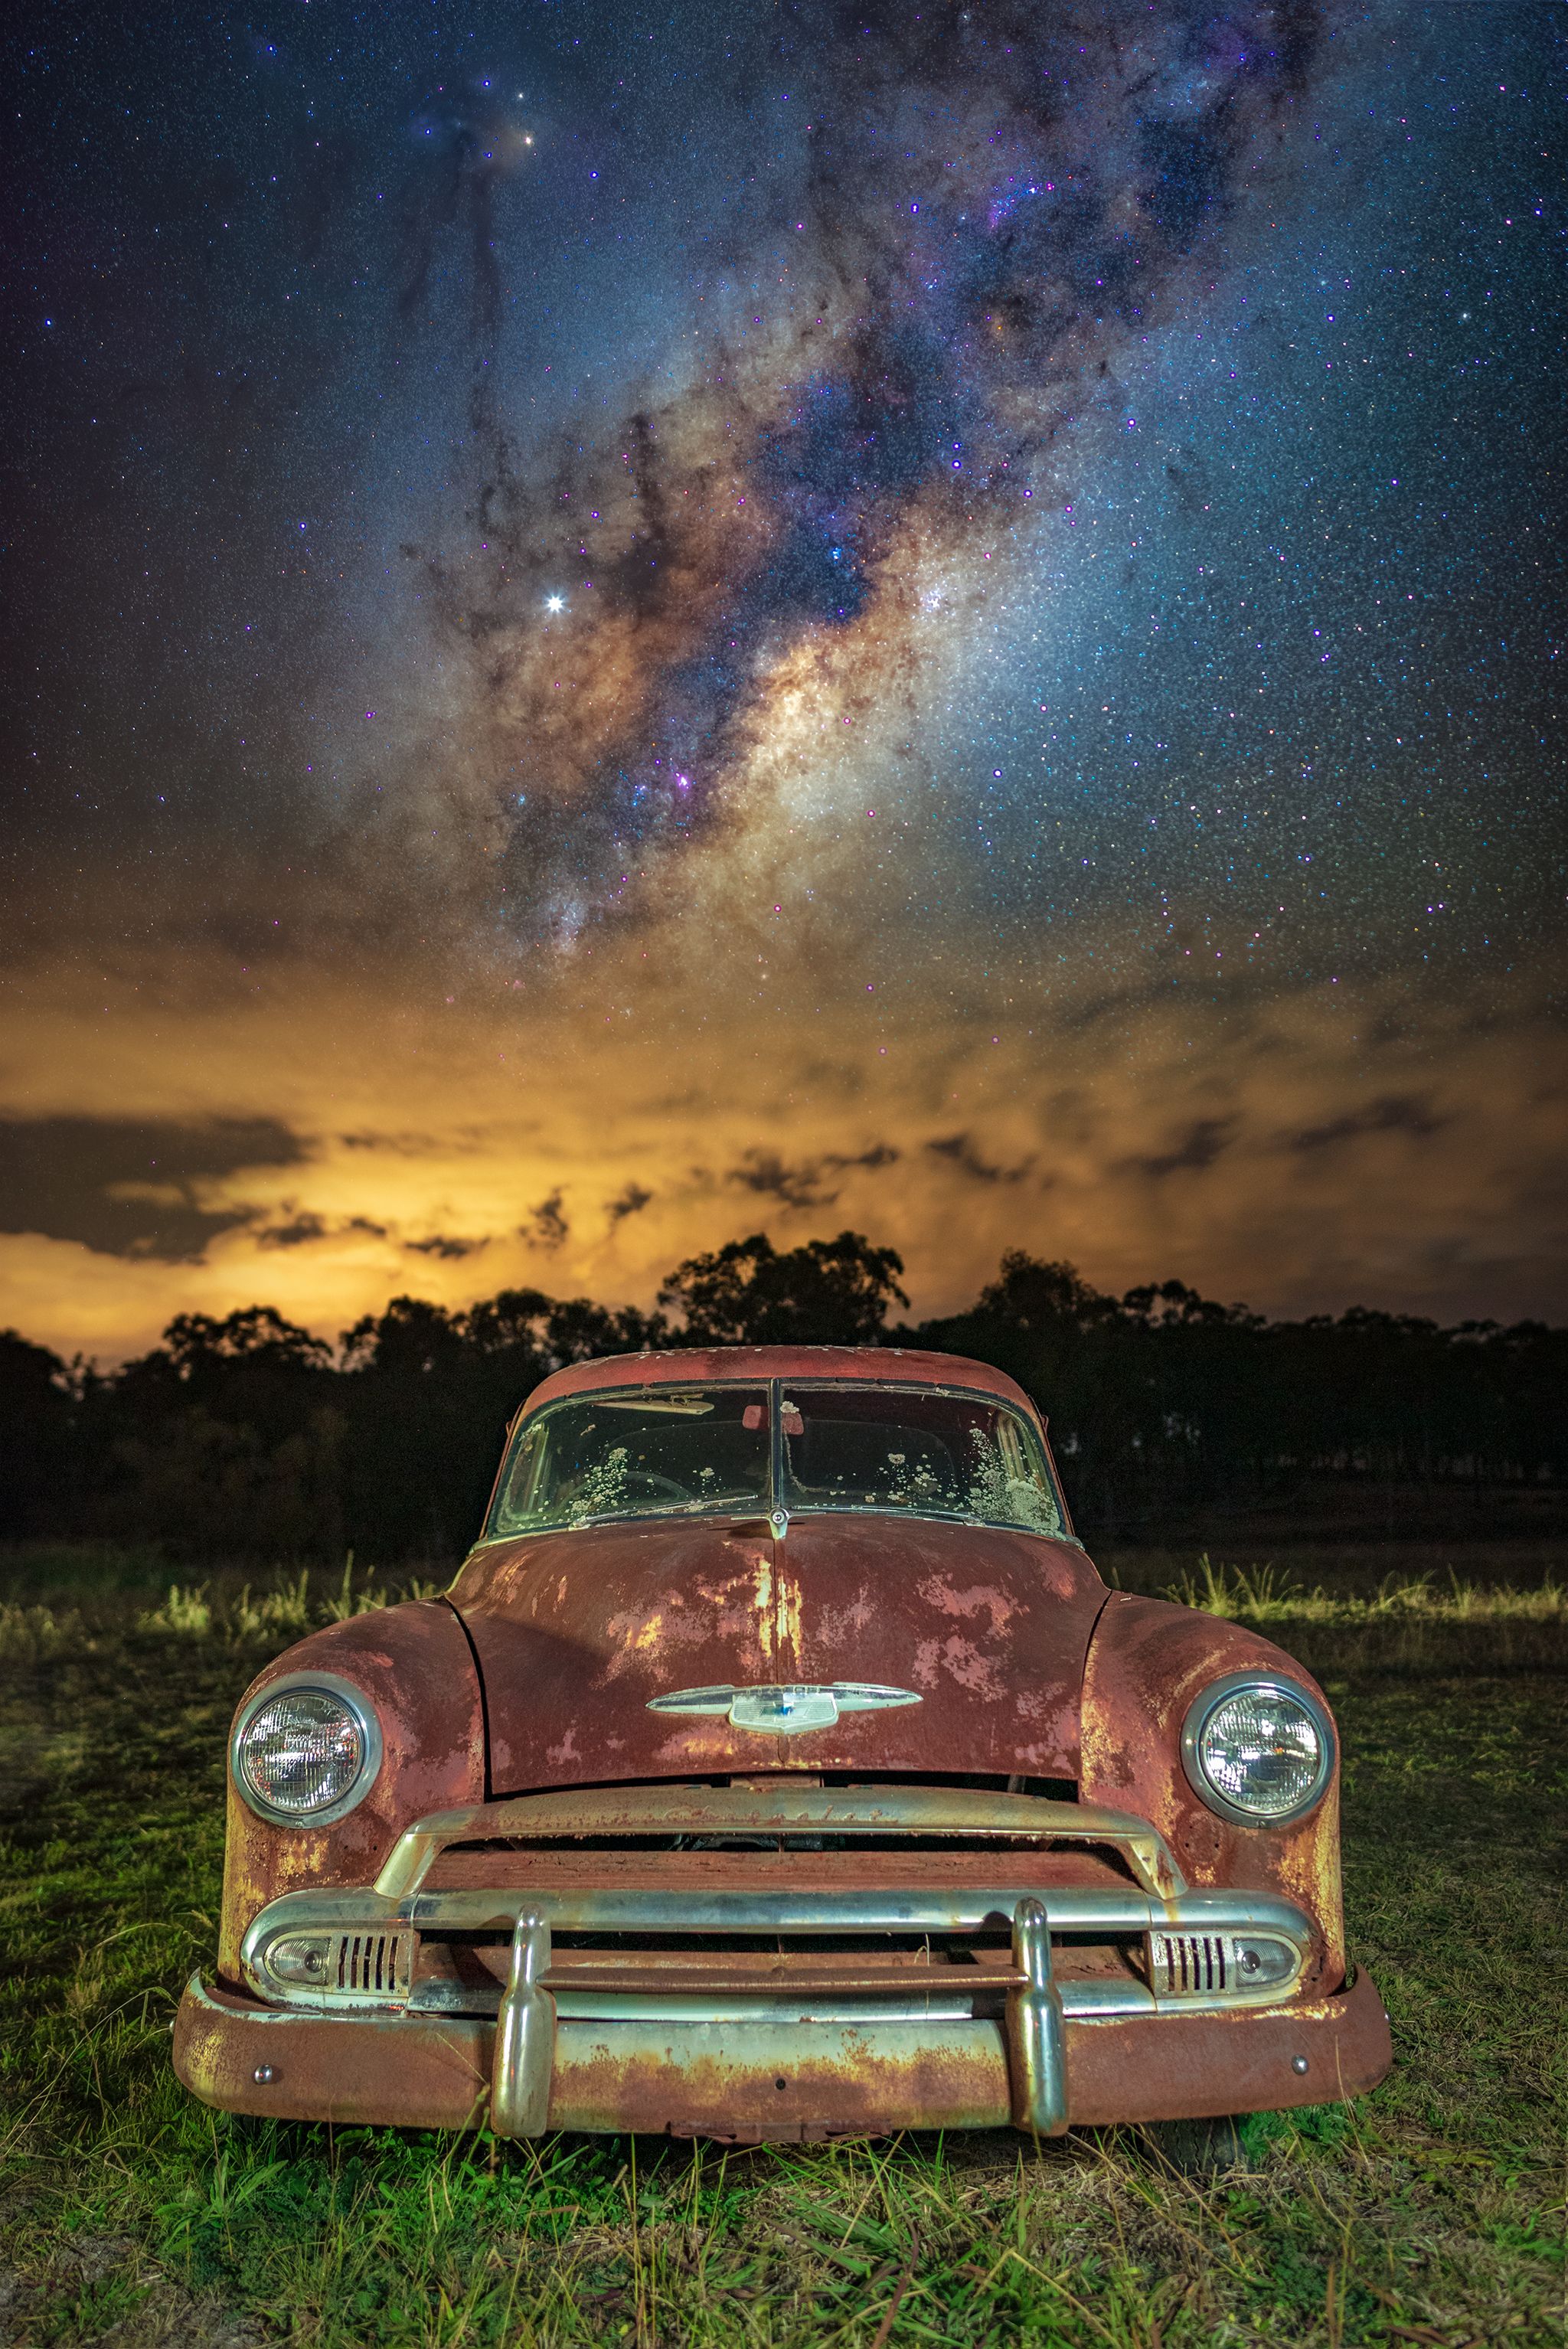 #australia #love #dunes #milkyway #night #stars #nightscape #nightsky #starry #abandoned #old, Imagery Fascinating